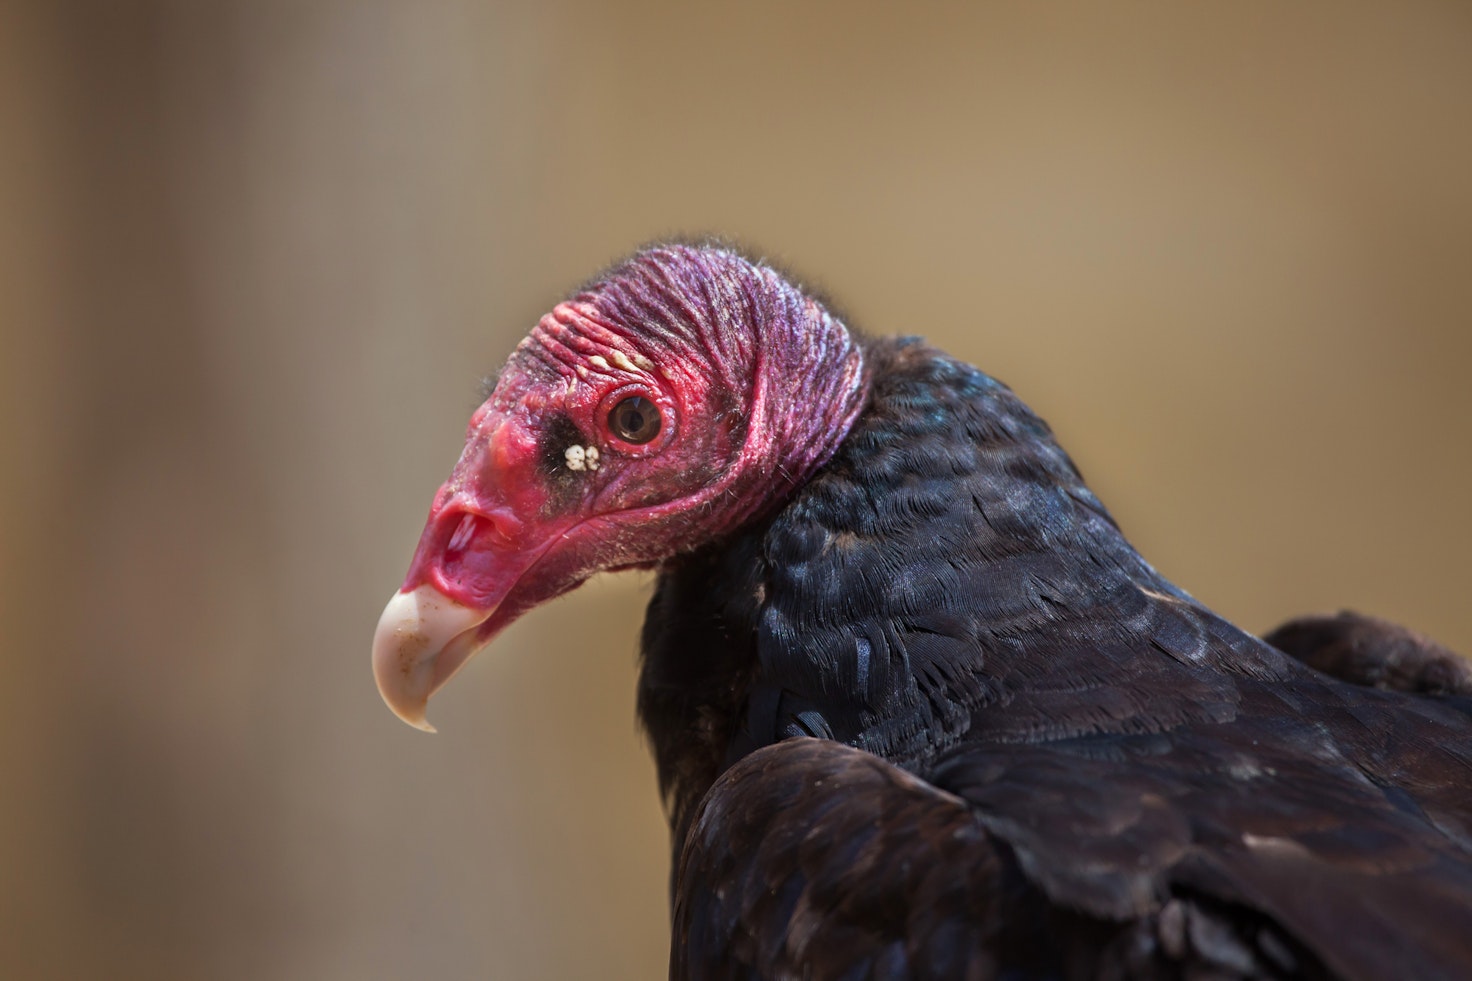 Roof Claim for Damage by Vultures Fails on Ordinary, Not Expert, Meaning of  'Infestation